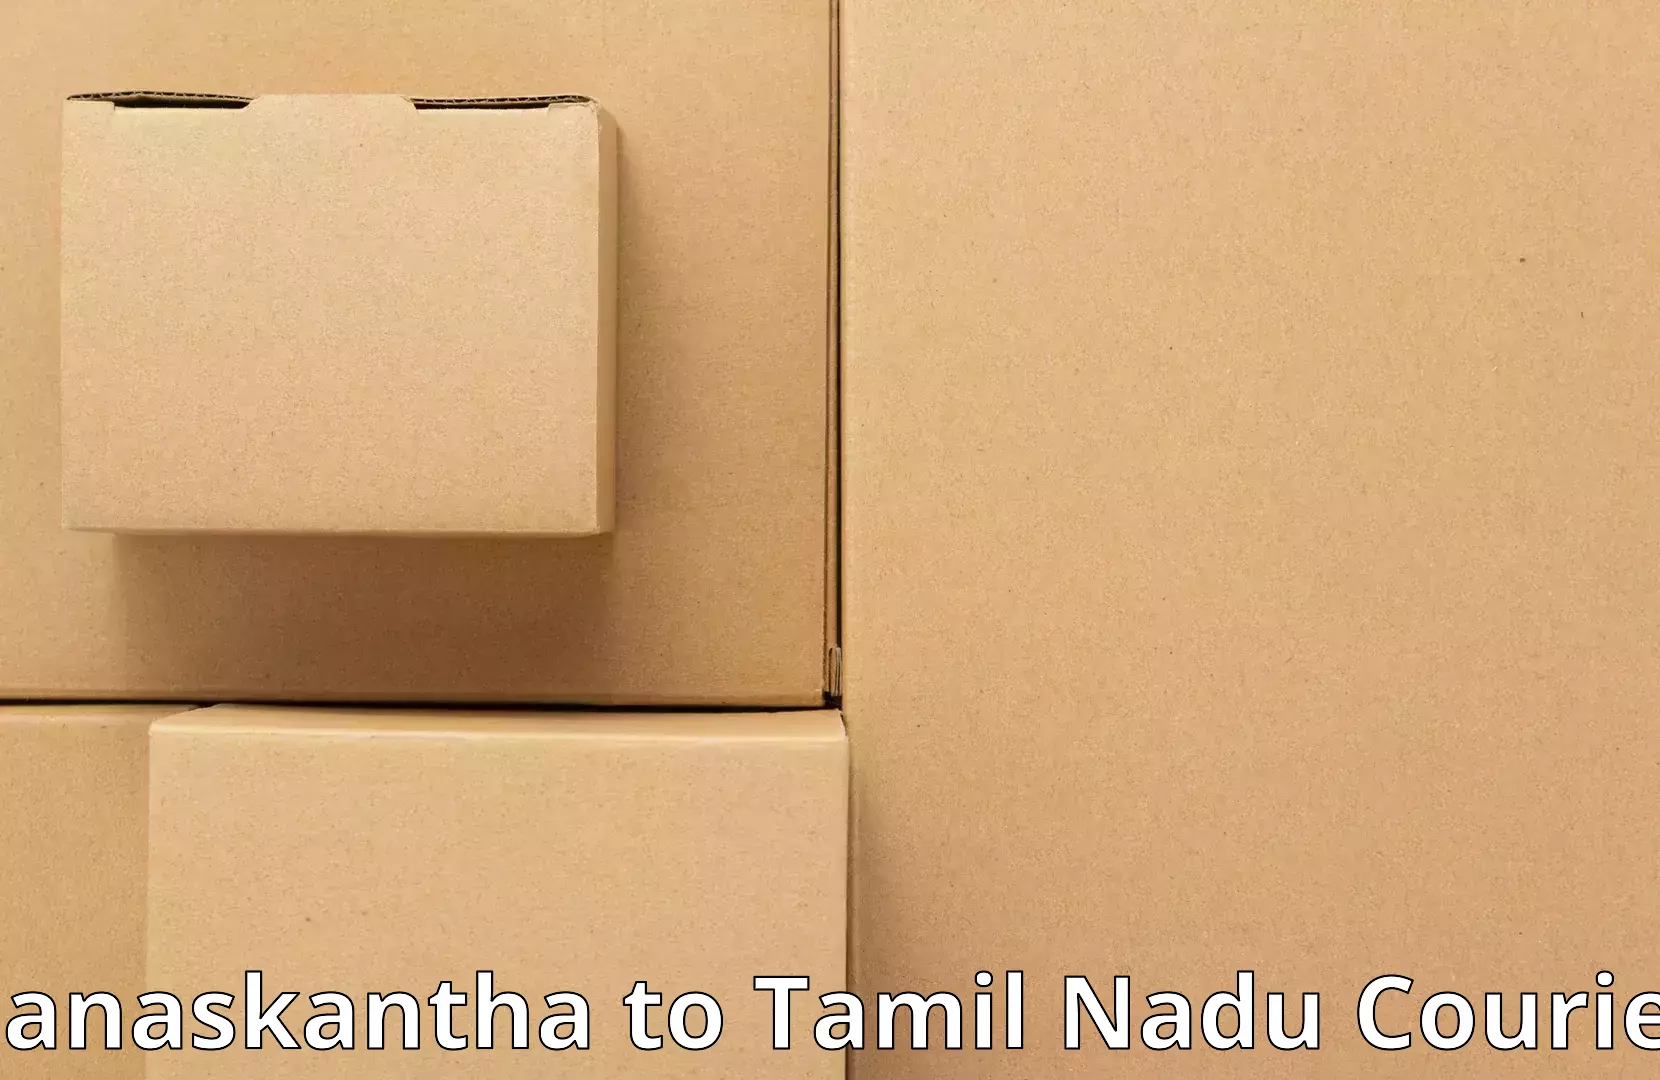 Personalized moving service Banaskantha to Ooty